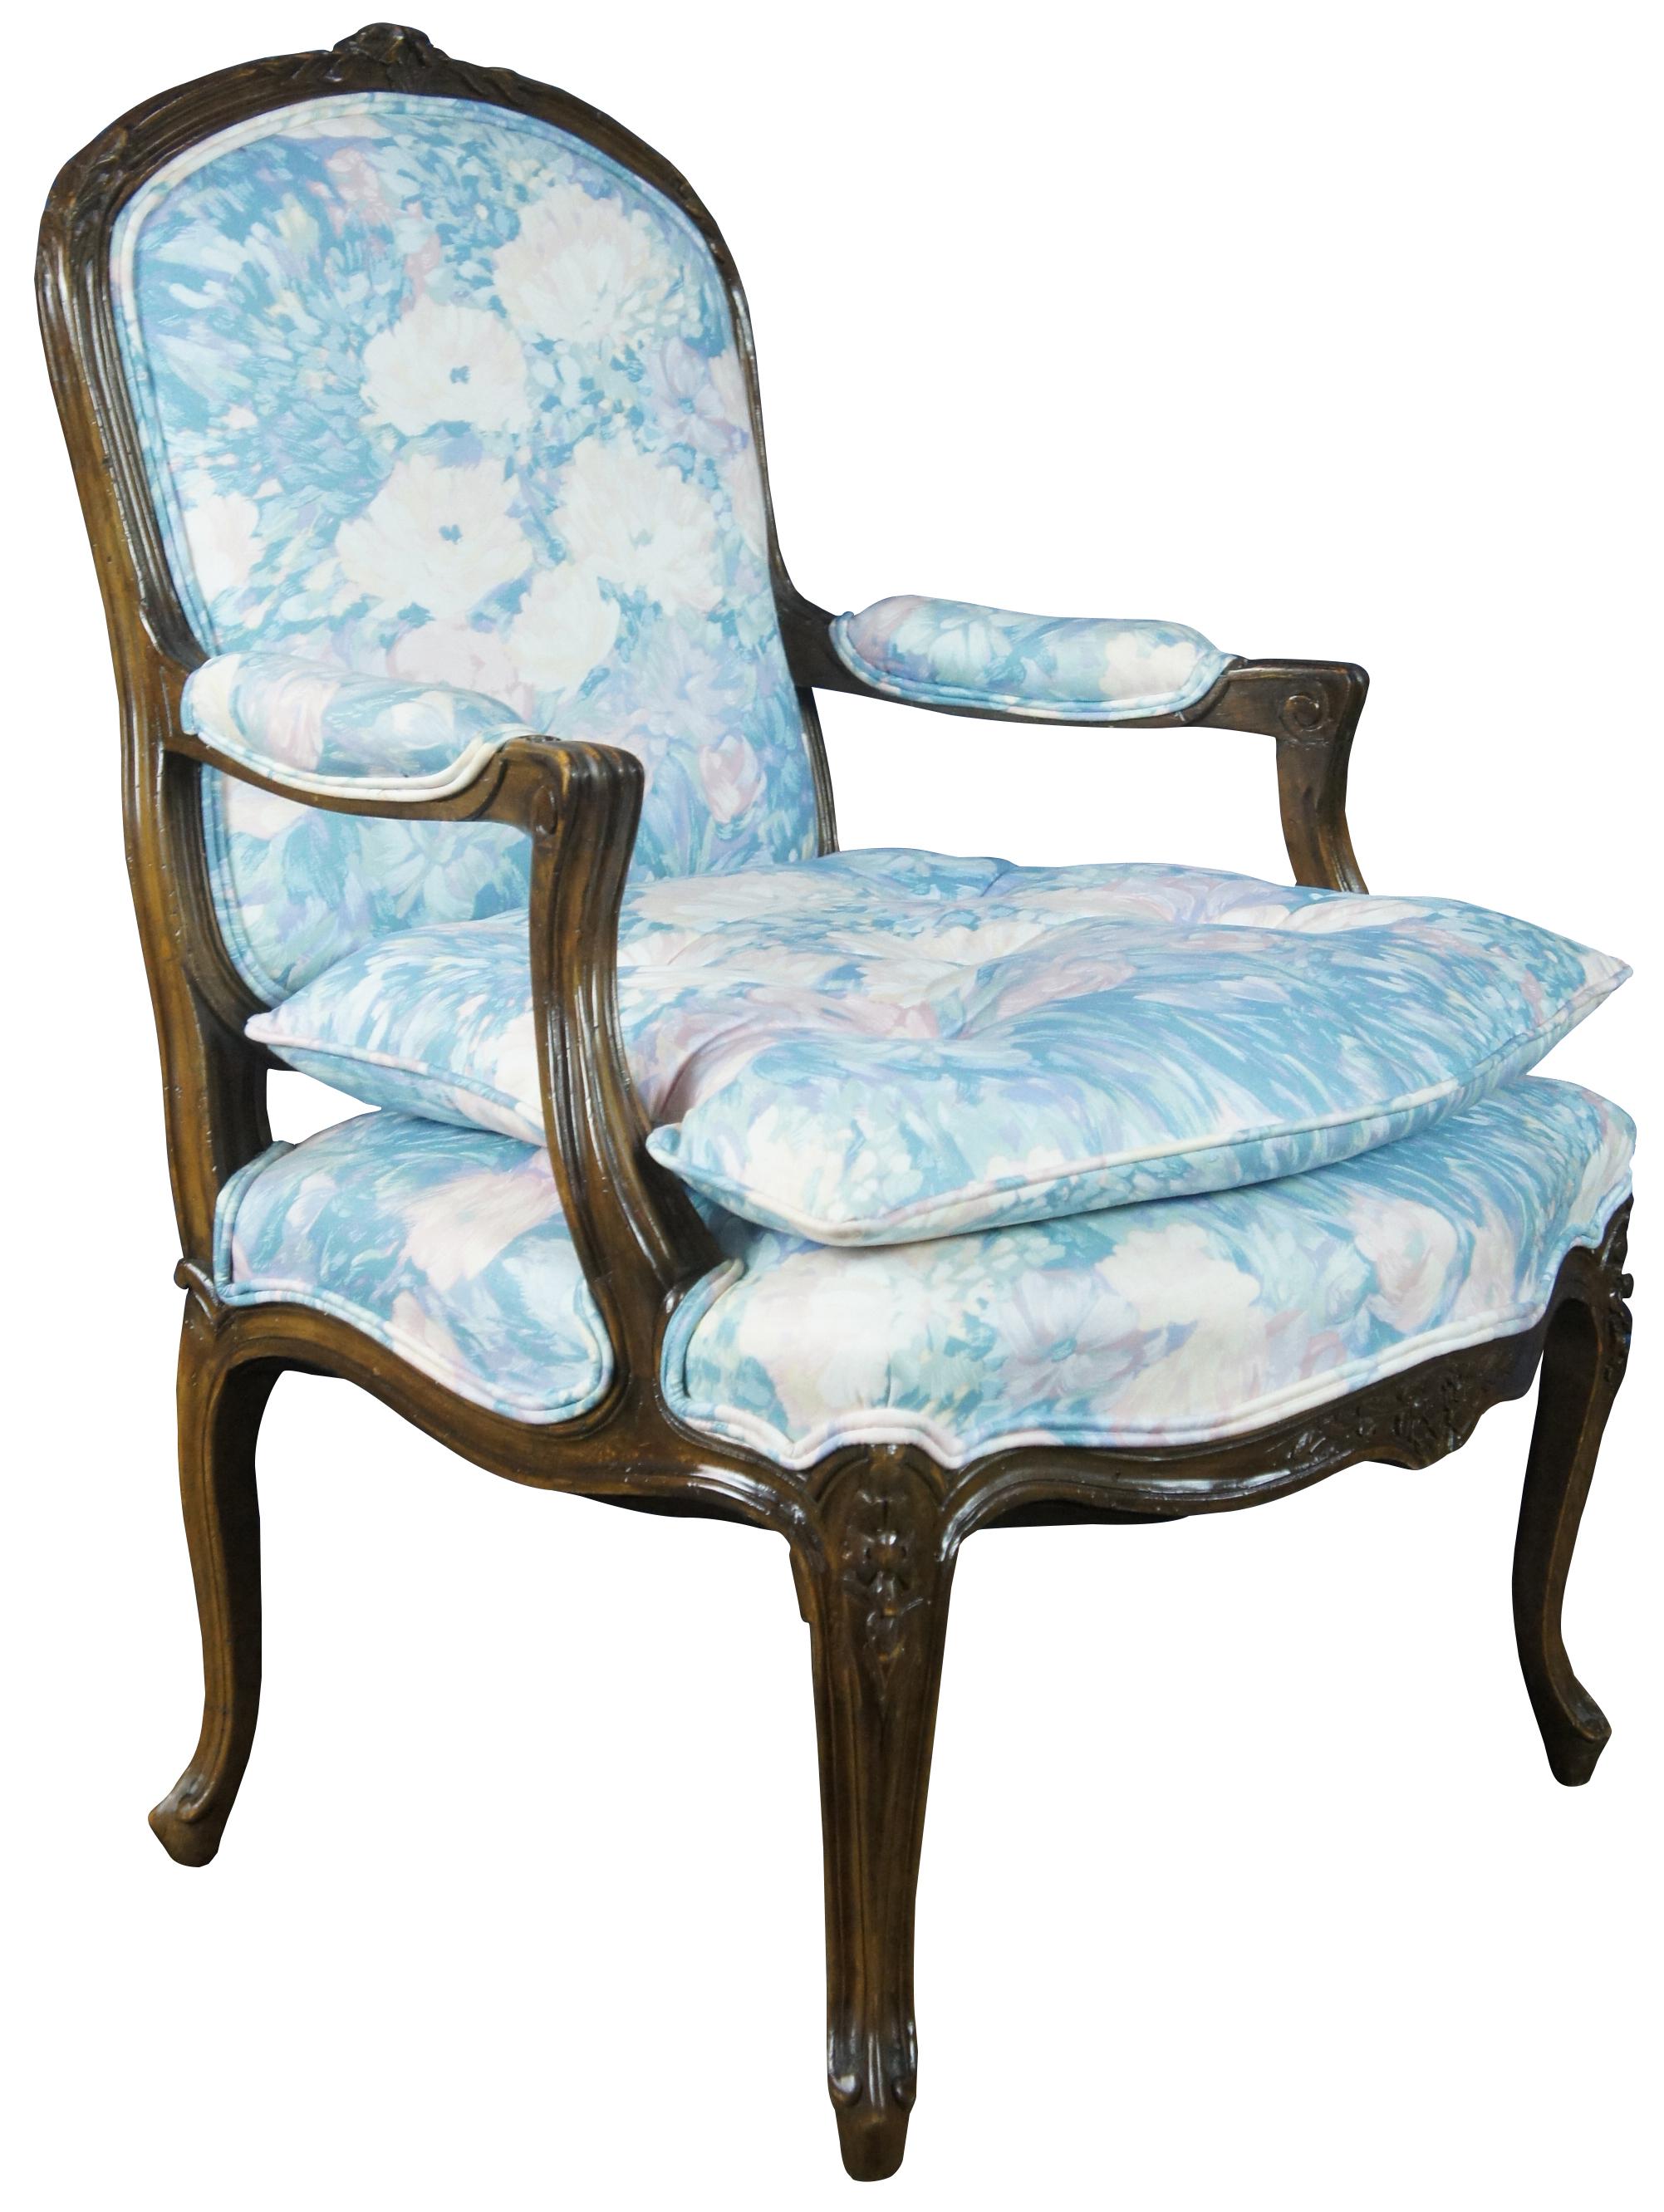 Vintage French Louis XVI style walut fauteuil serpentine armchair by Trouvailles Inc of Watertown, Ma. Made of walnut featuring serpentine form with padded arms, cabriole legs and carved floral and fluted accents. Upholstered in a floral Monet /